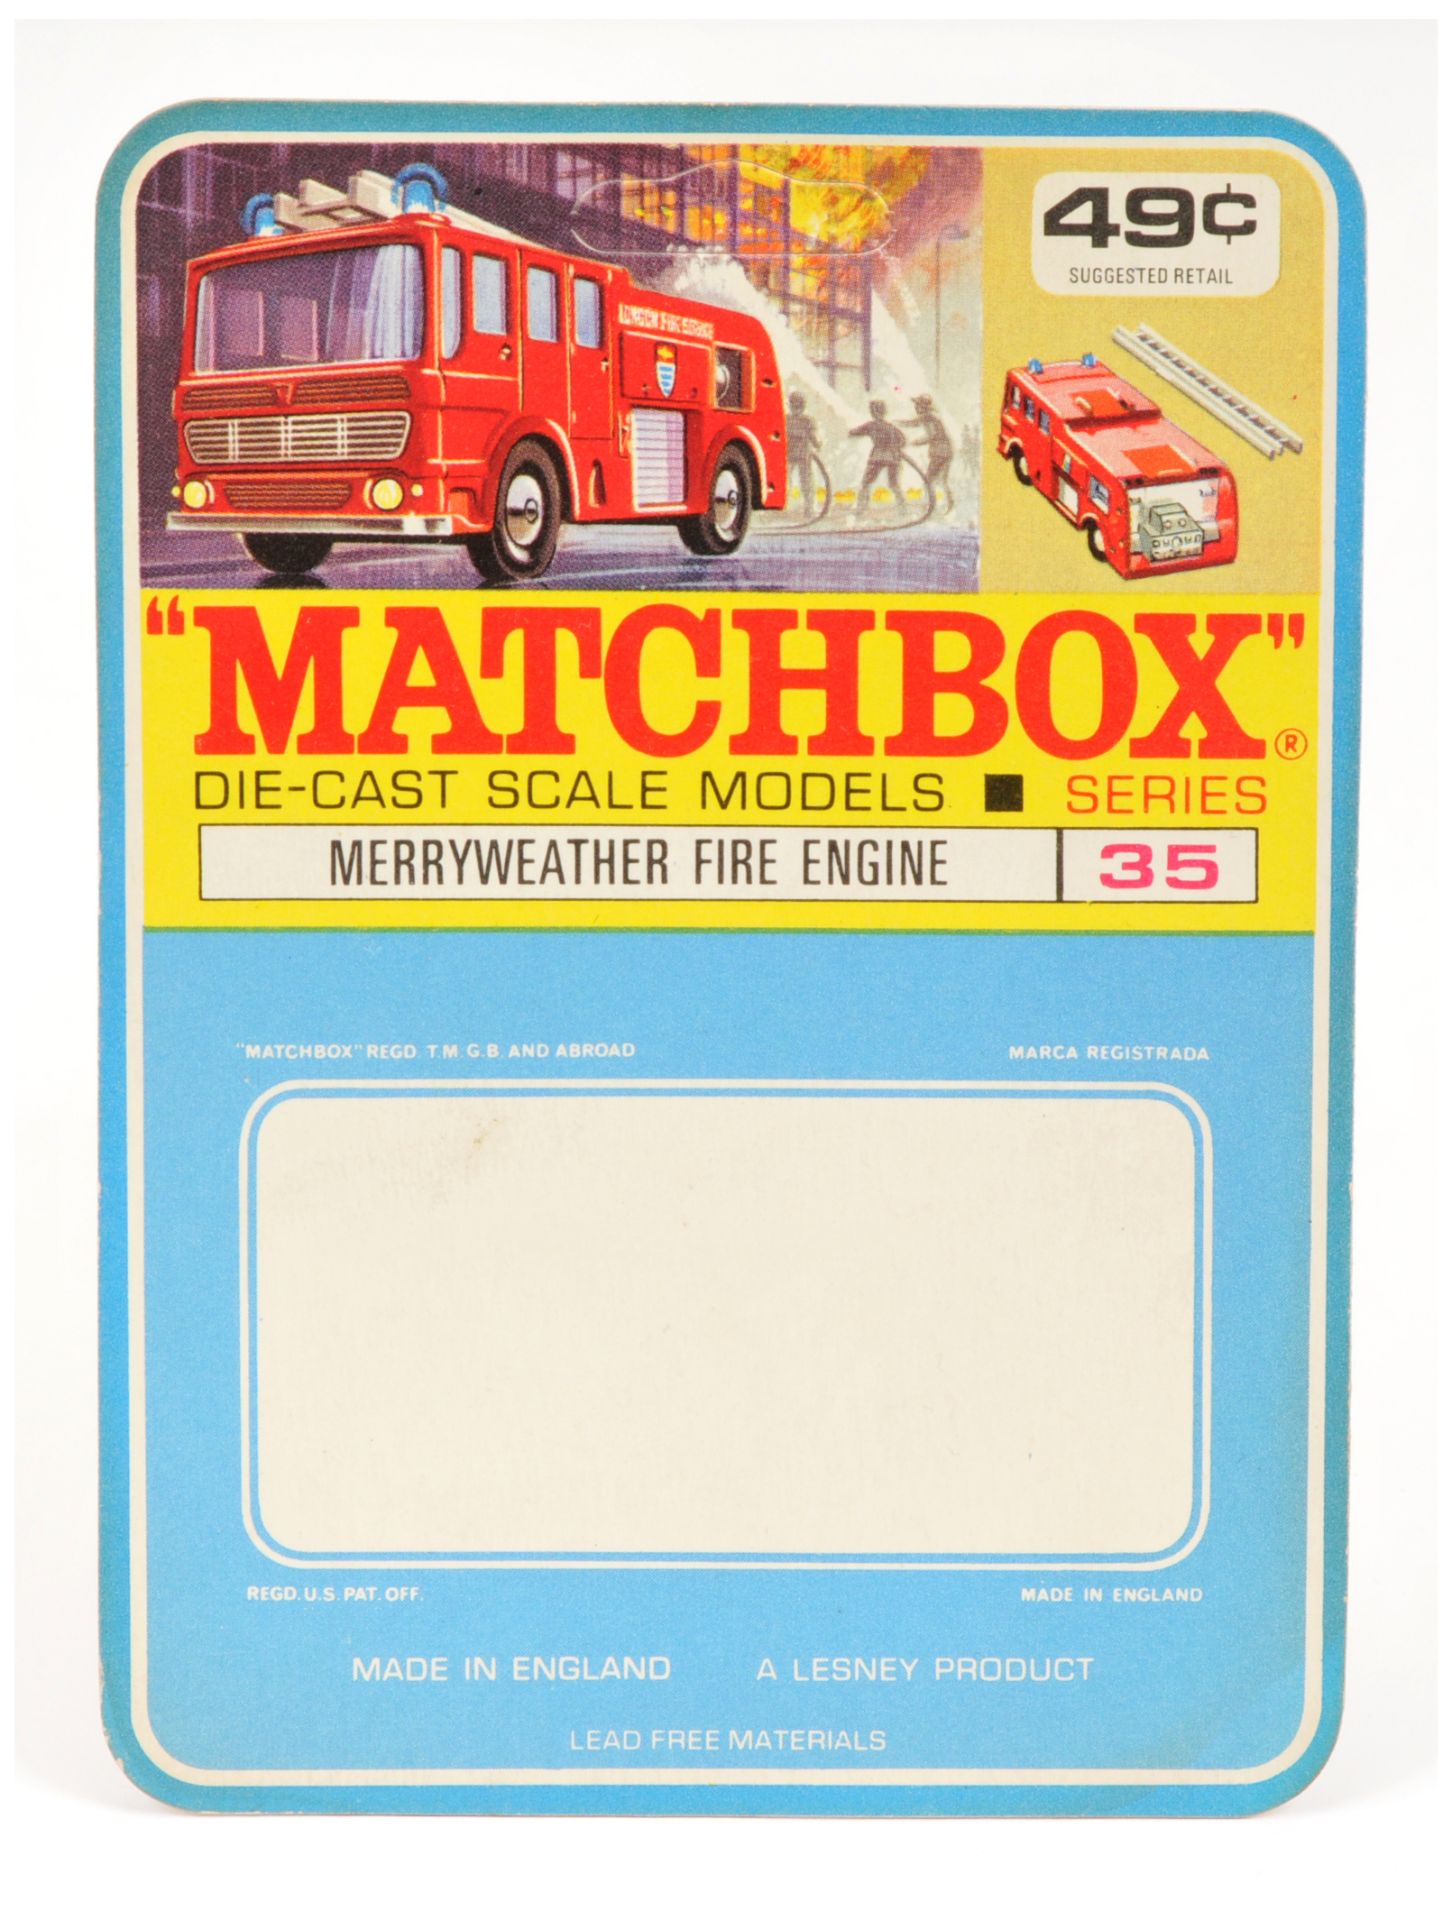 Matchbox Pinters Proof Sample Blister Pack Backing Card for the proposed 35c Merryweather Fire En...